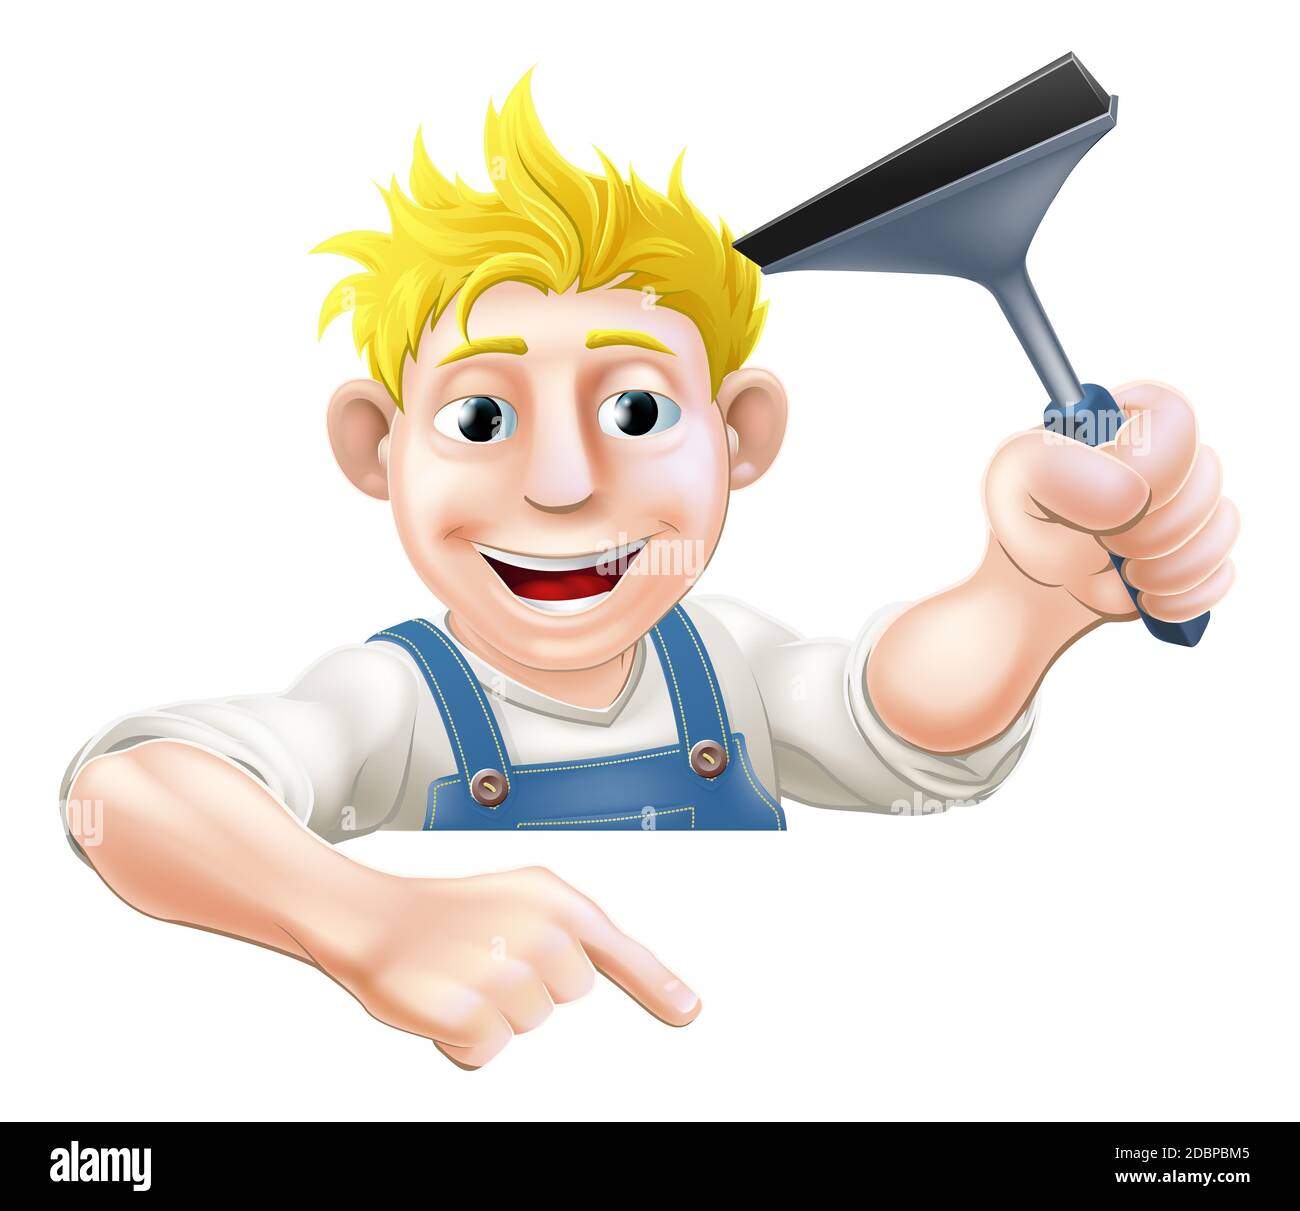 An illustration of a window cleaner holding a squeegee and pointing down at a sign or your message Stock Photo